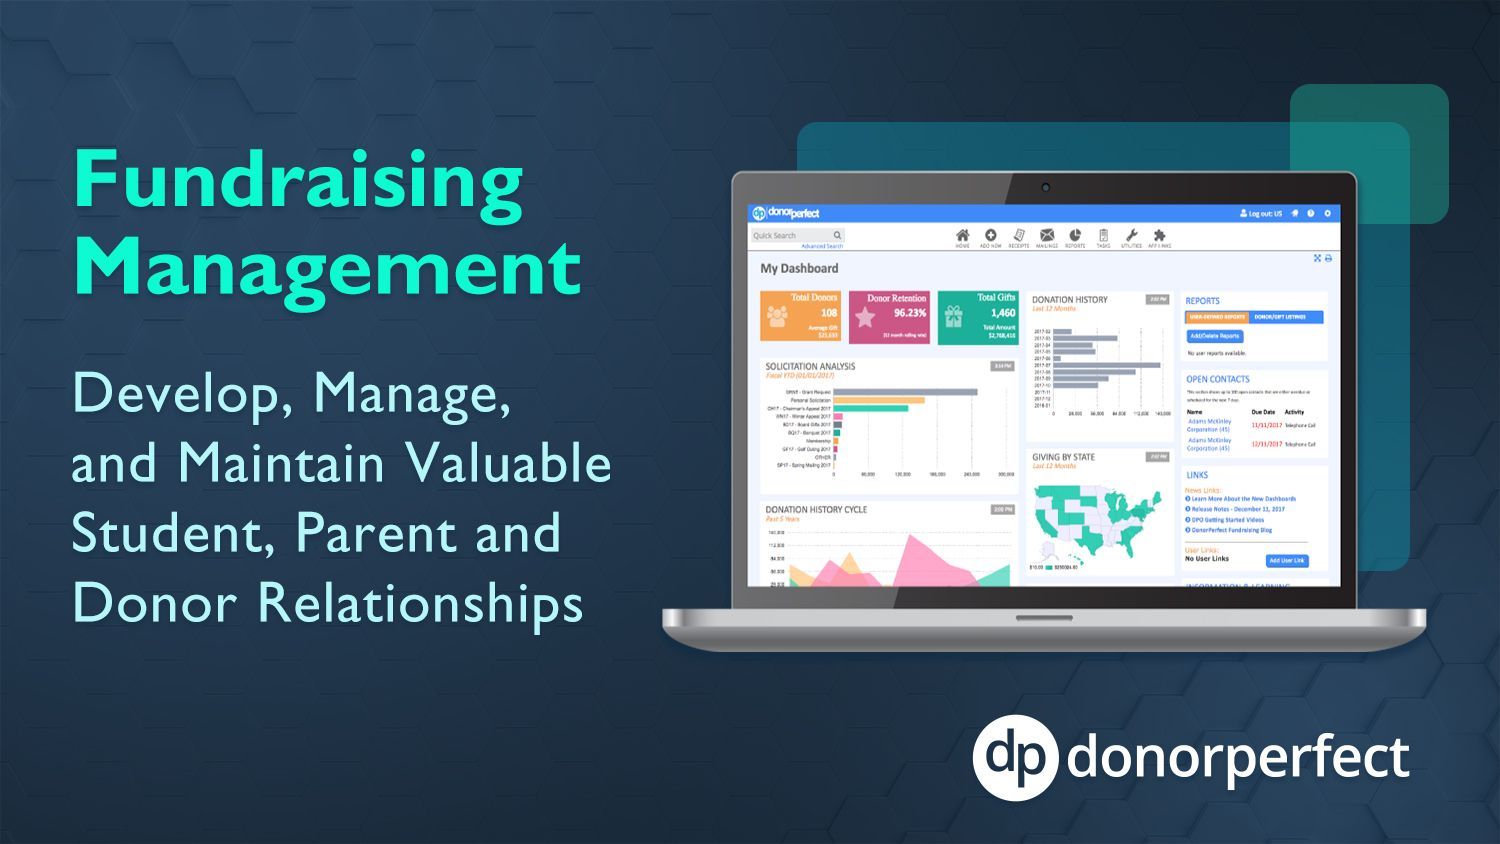 Fundraising Management - Develop, Manage, and Maintain Valuable Student, Parent and Donor Relationships